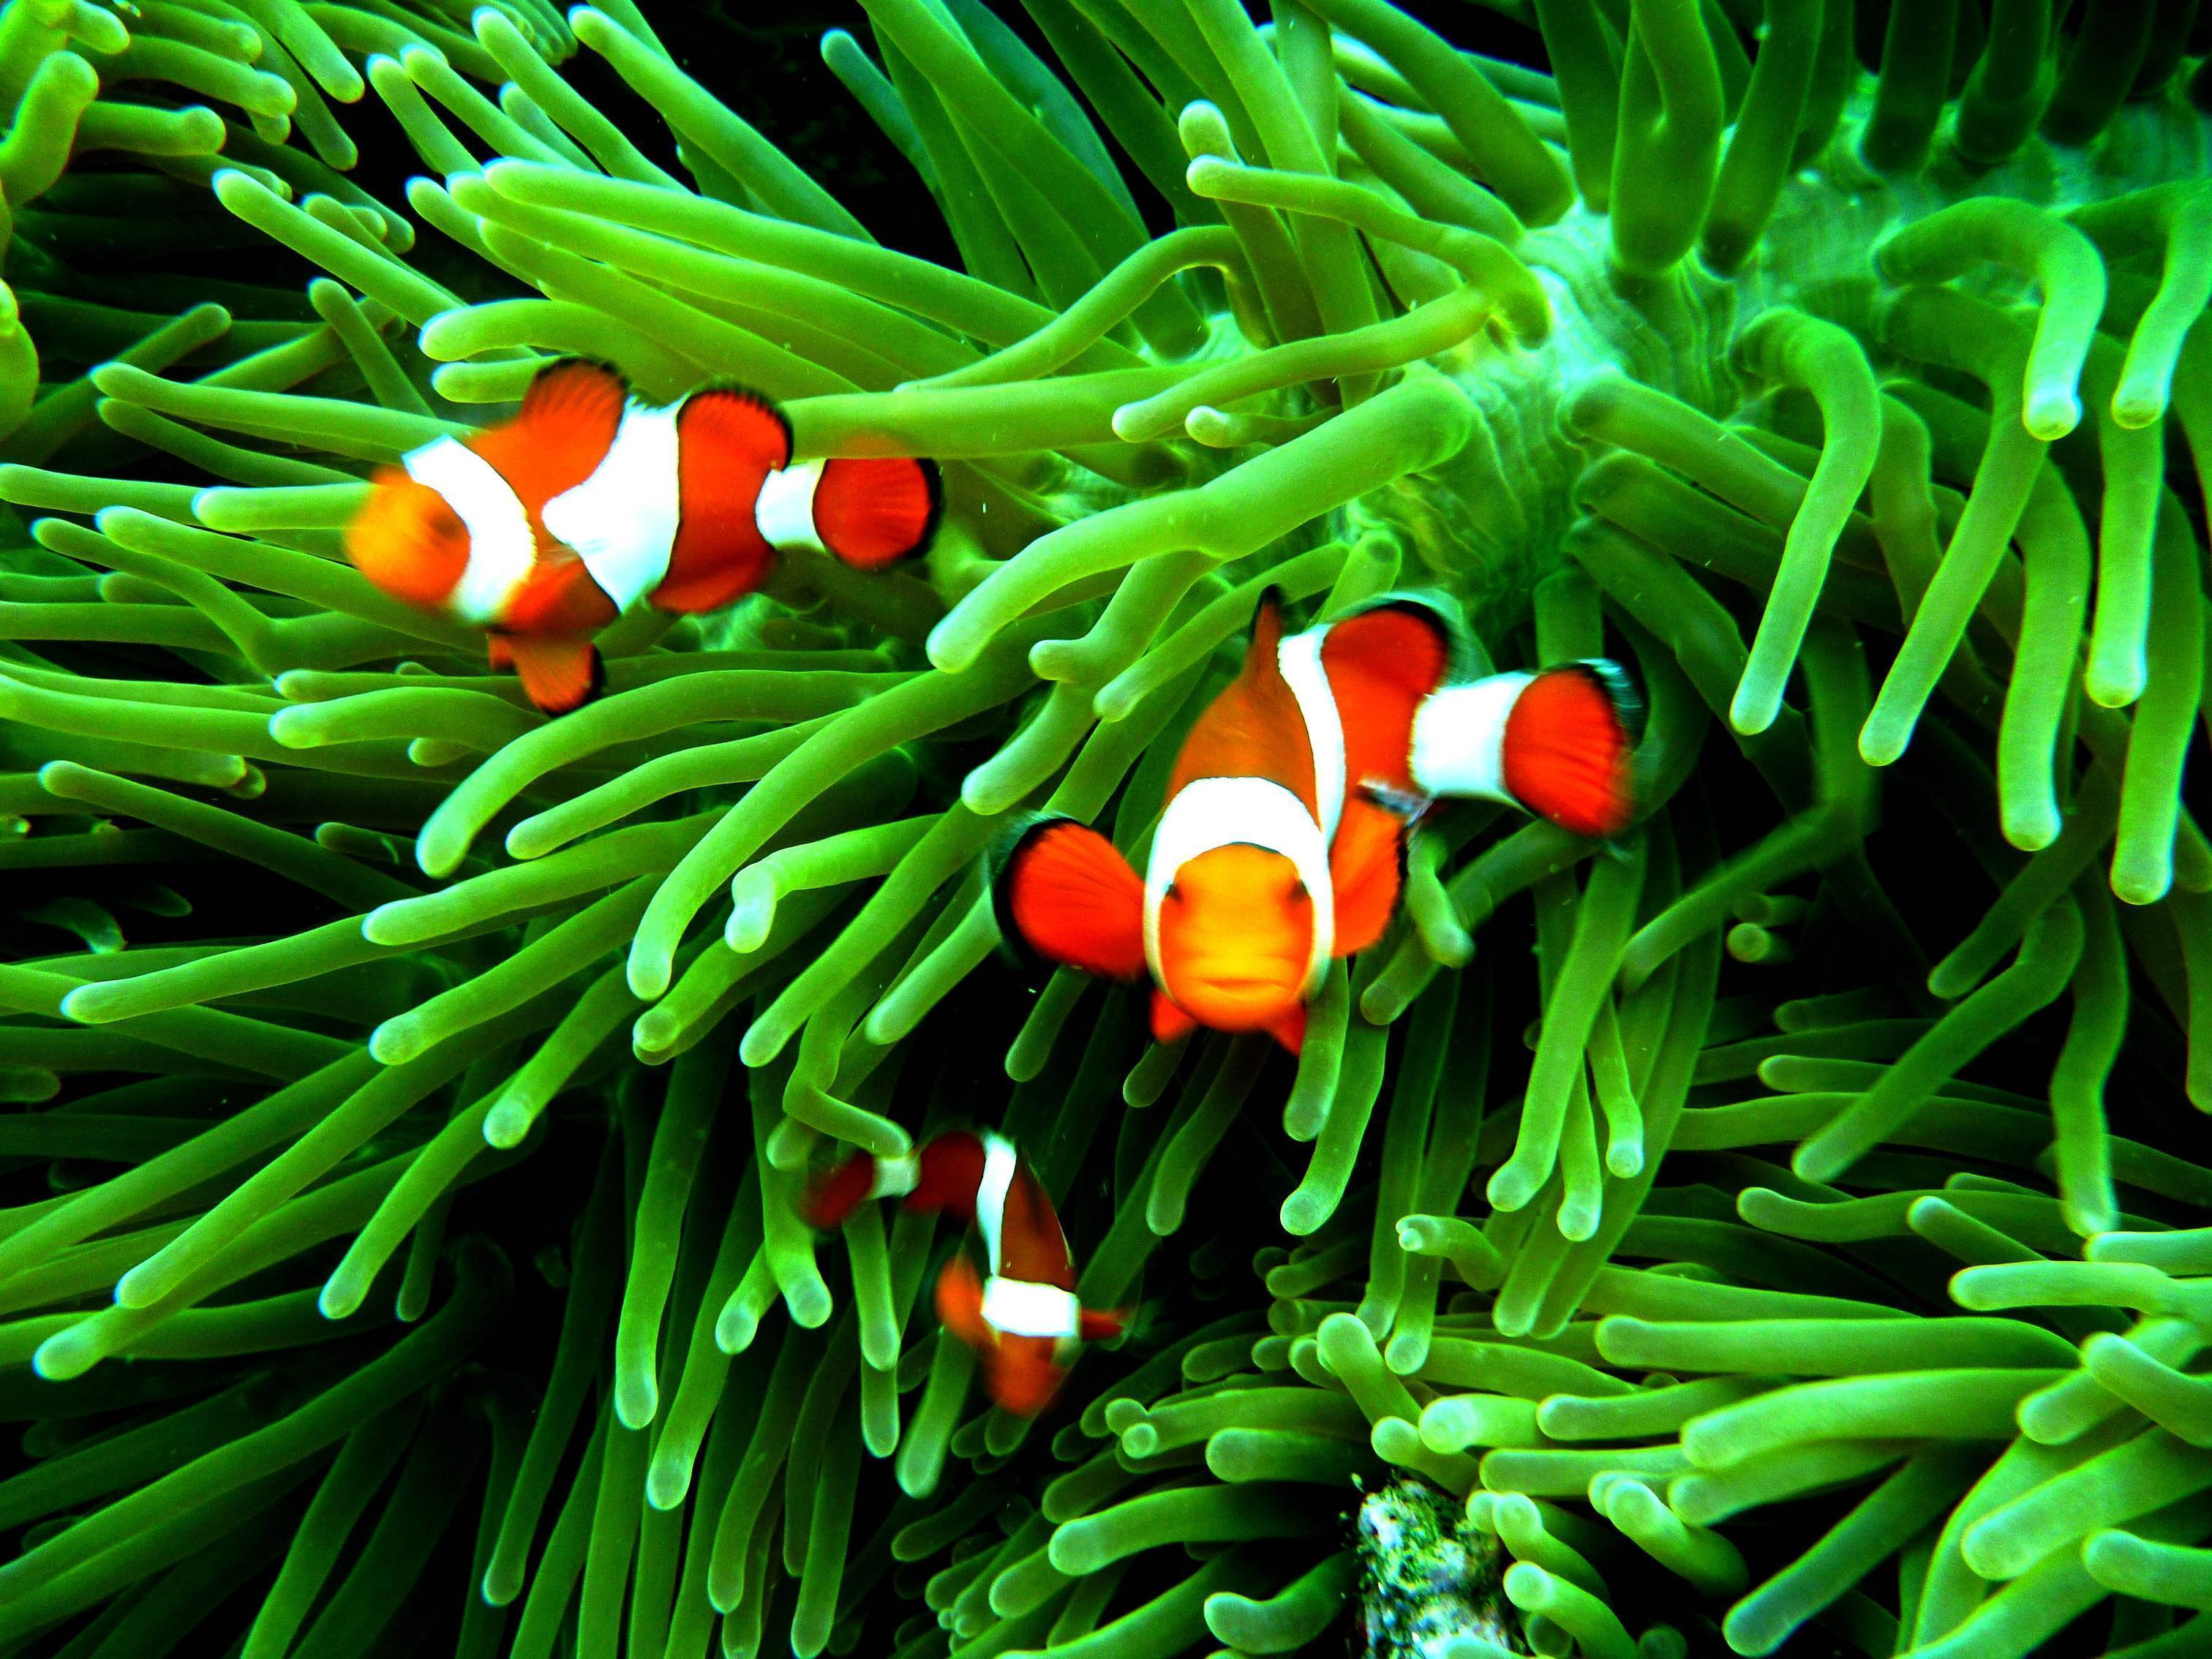 Clown Fish Background Image For iPhone. Fish, Fish, Image